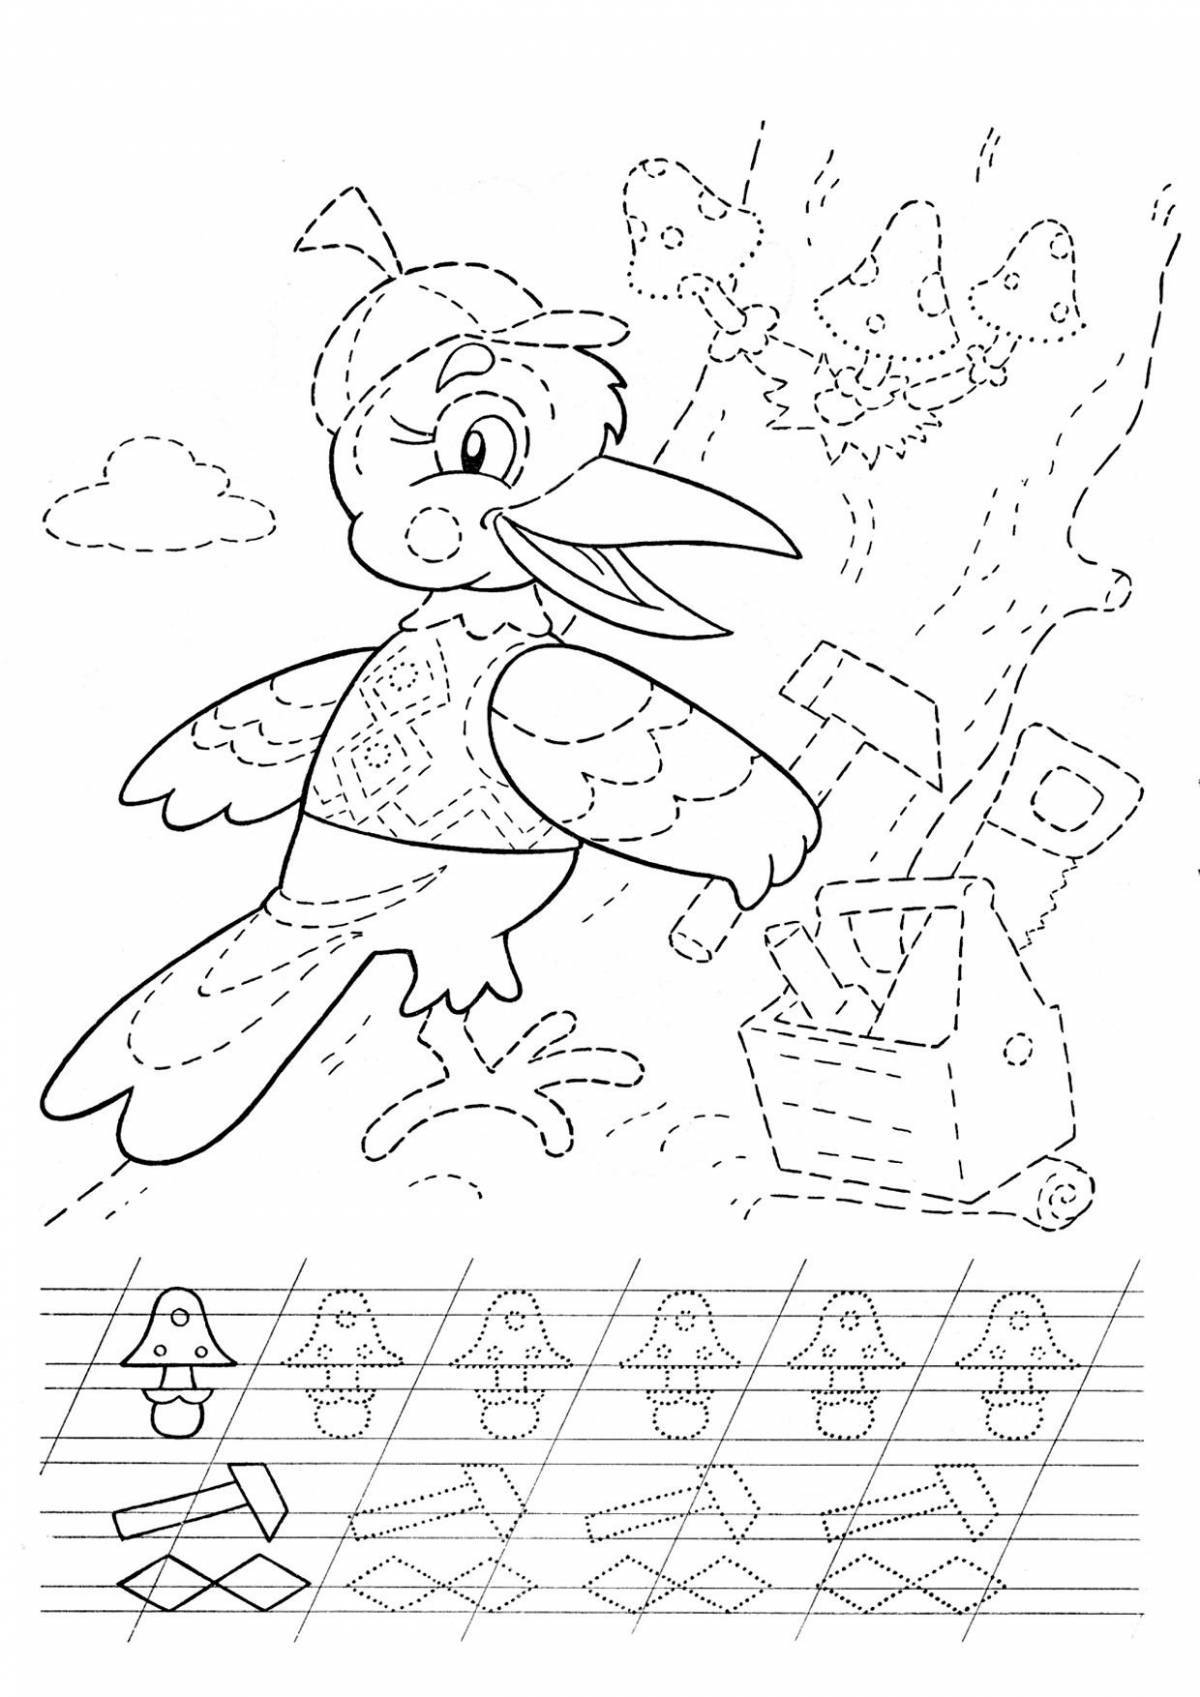 Fun coloring book for preschoolers 6-7 years old